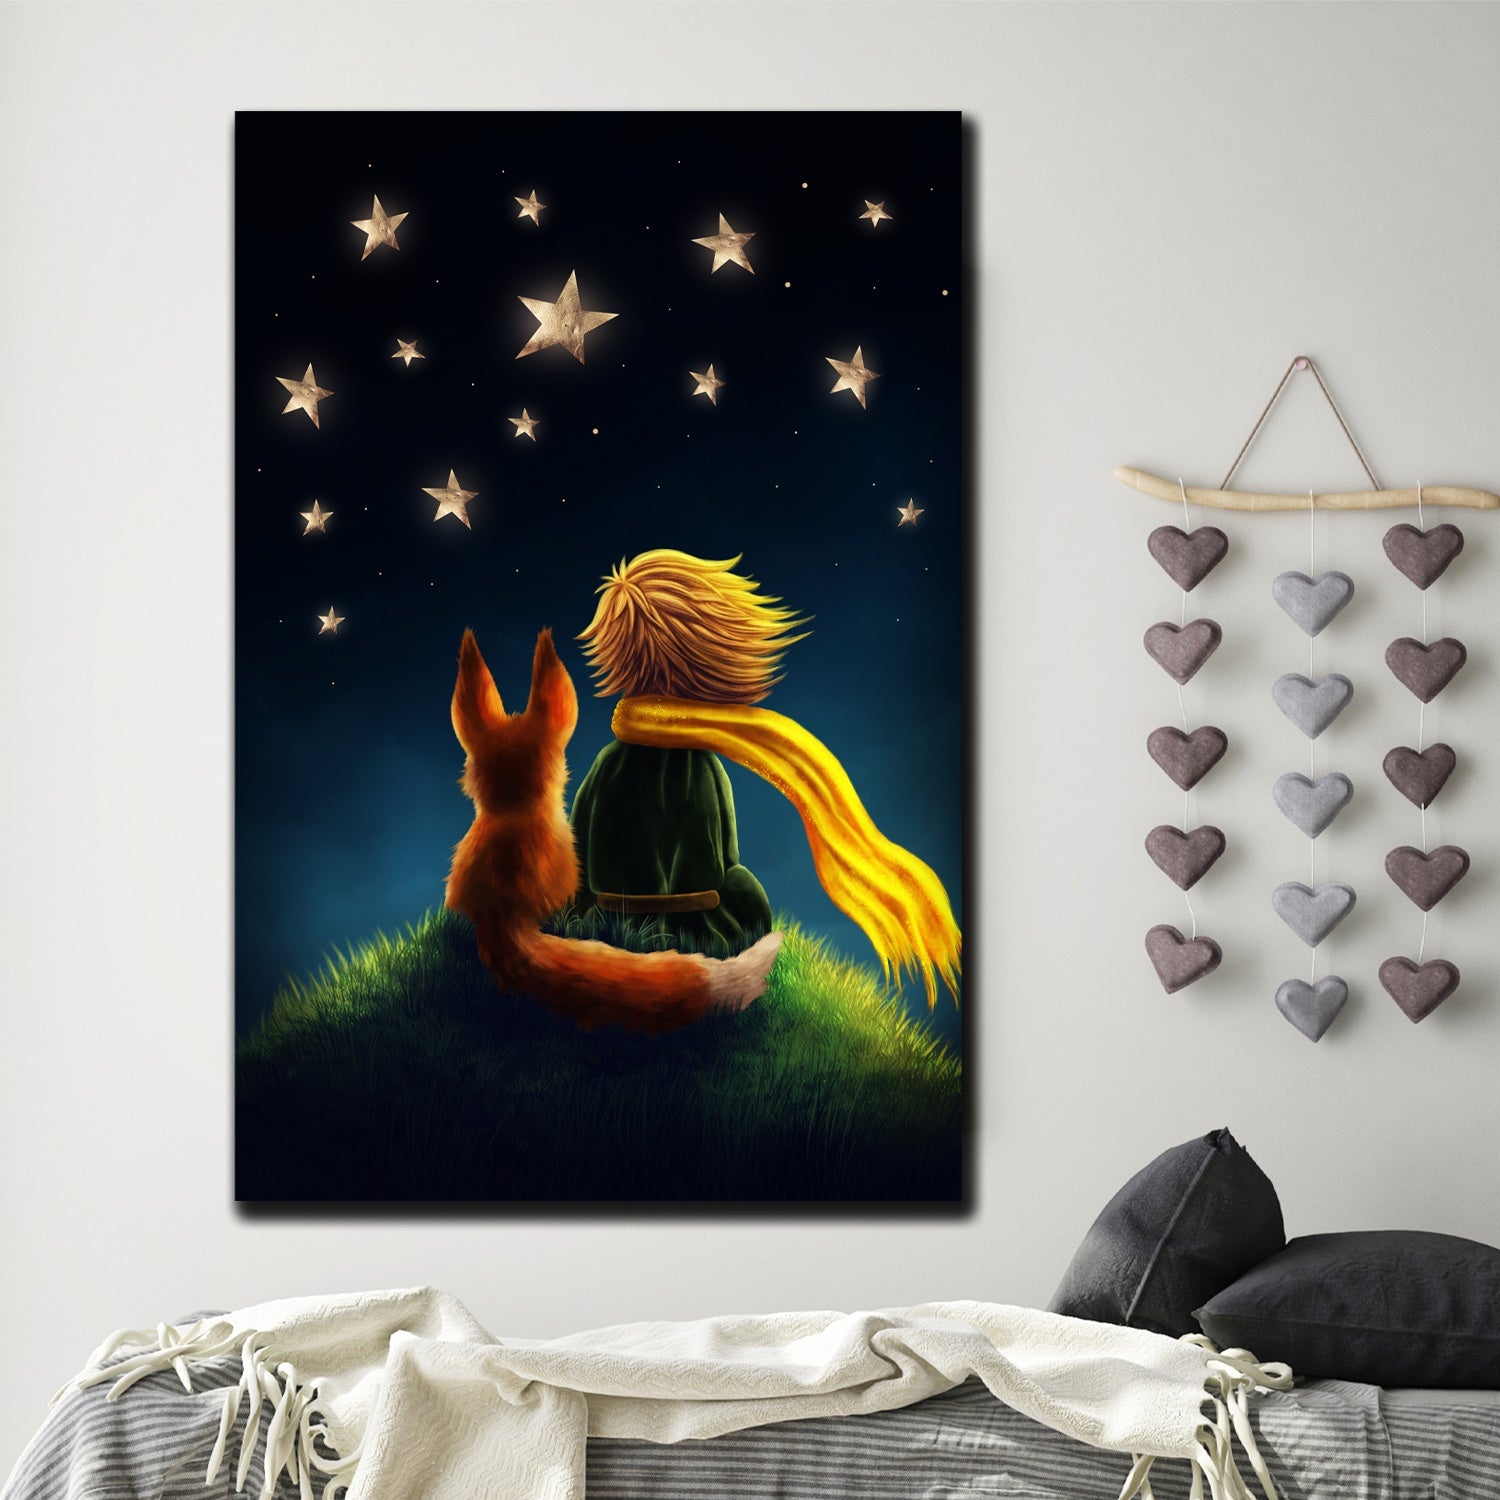 https://cdn.shopify.com/s/files/1/0387/9986/8044/products/TheLittlePrinceCanvasArtprintStretched-3.jpg